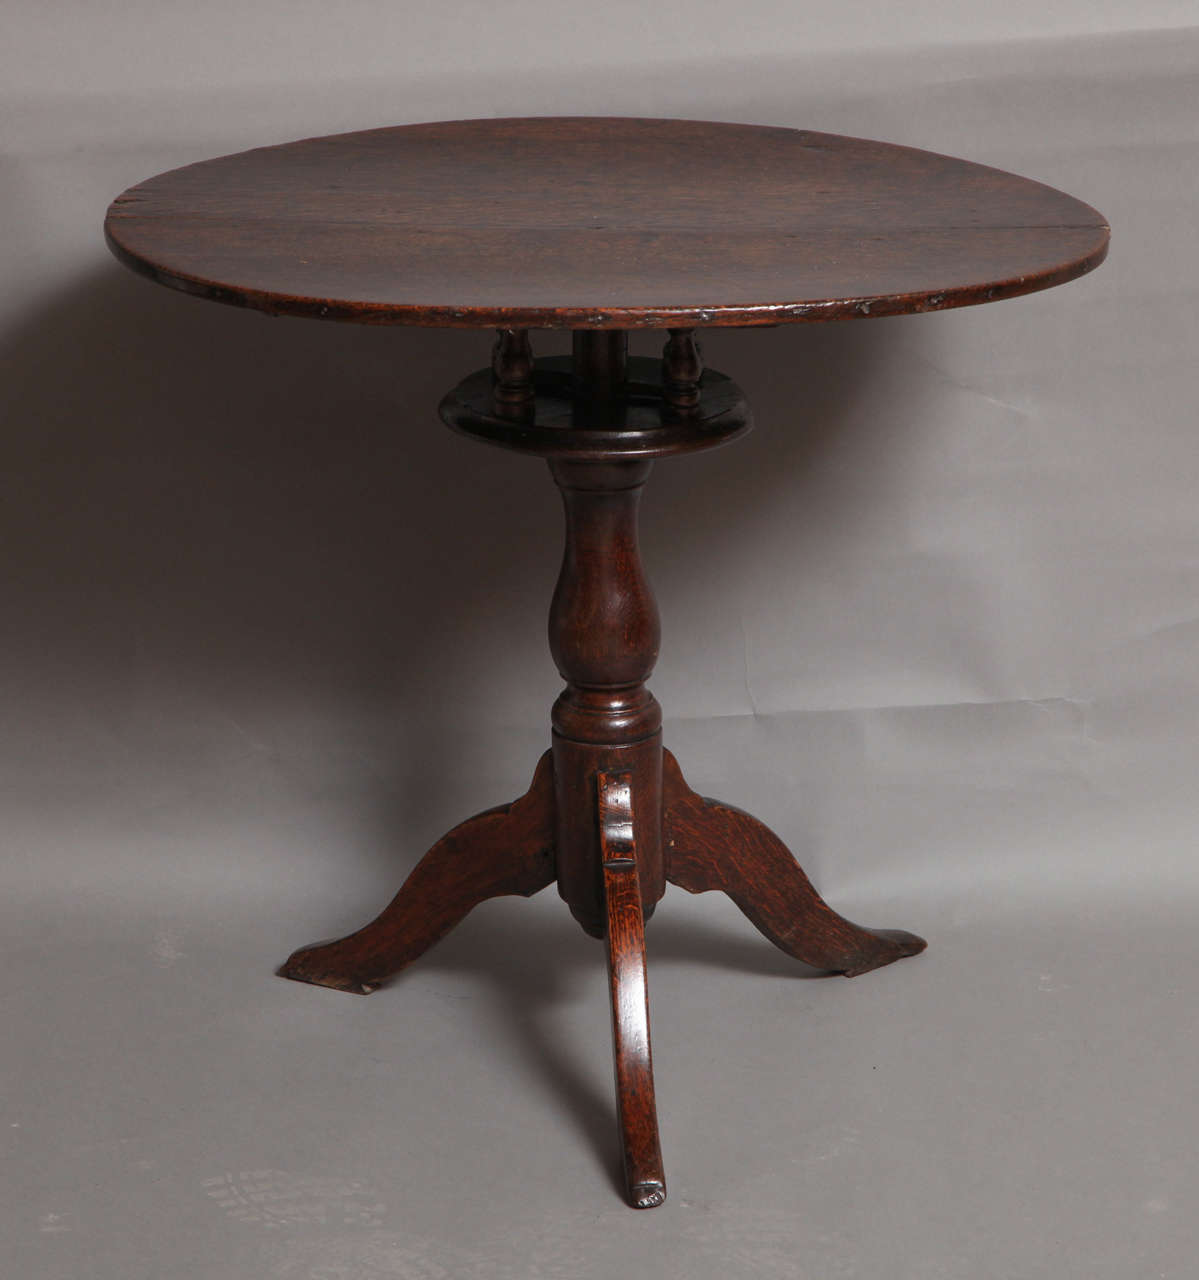 Rare and quirky early 18th Century Welsh oval tilt top table with birdcage mechanism, the richly patinated two plank top over, balustrade turned birdcage and vernacularly fashioned locking system, the shaft turned in the same manner, over shaped and